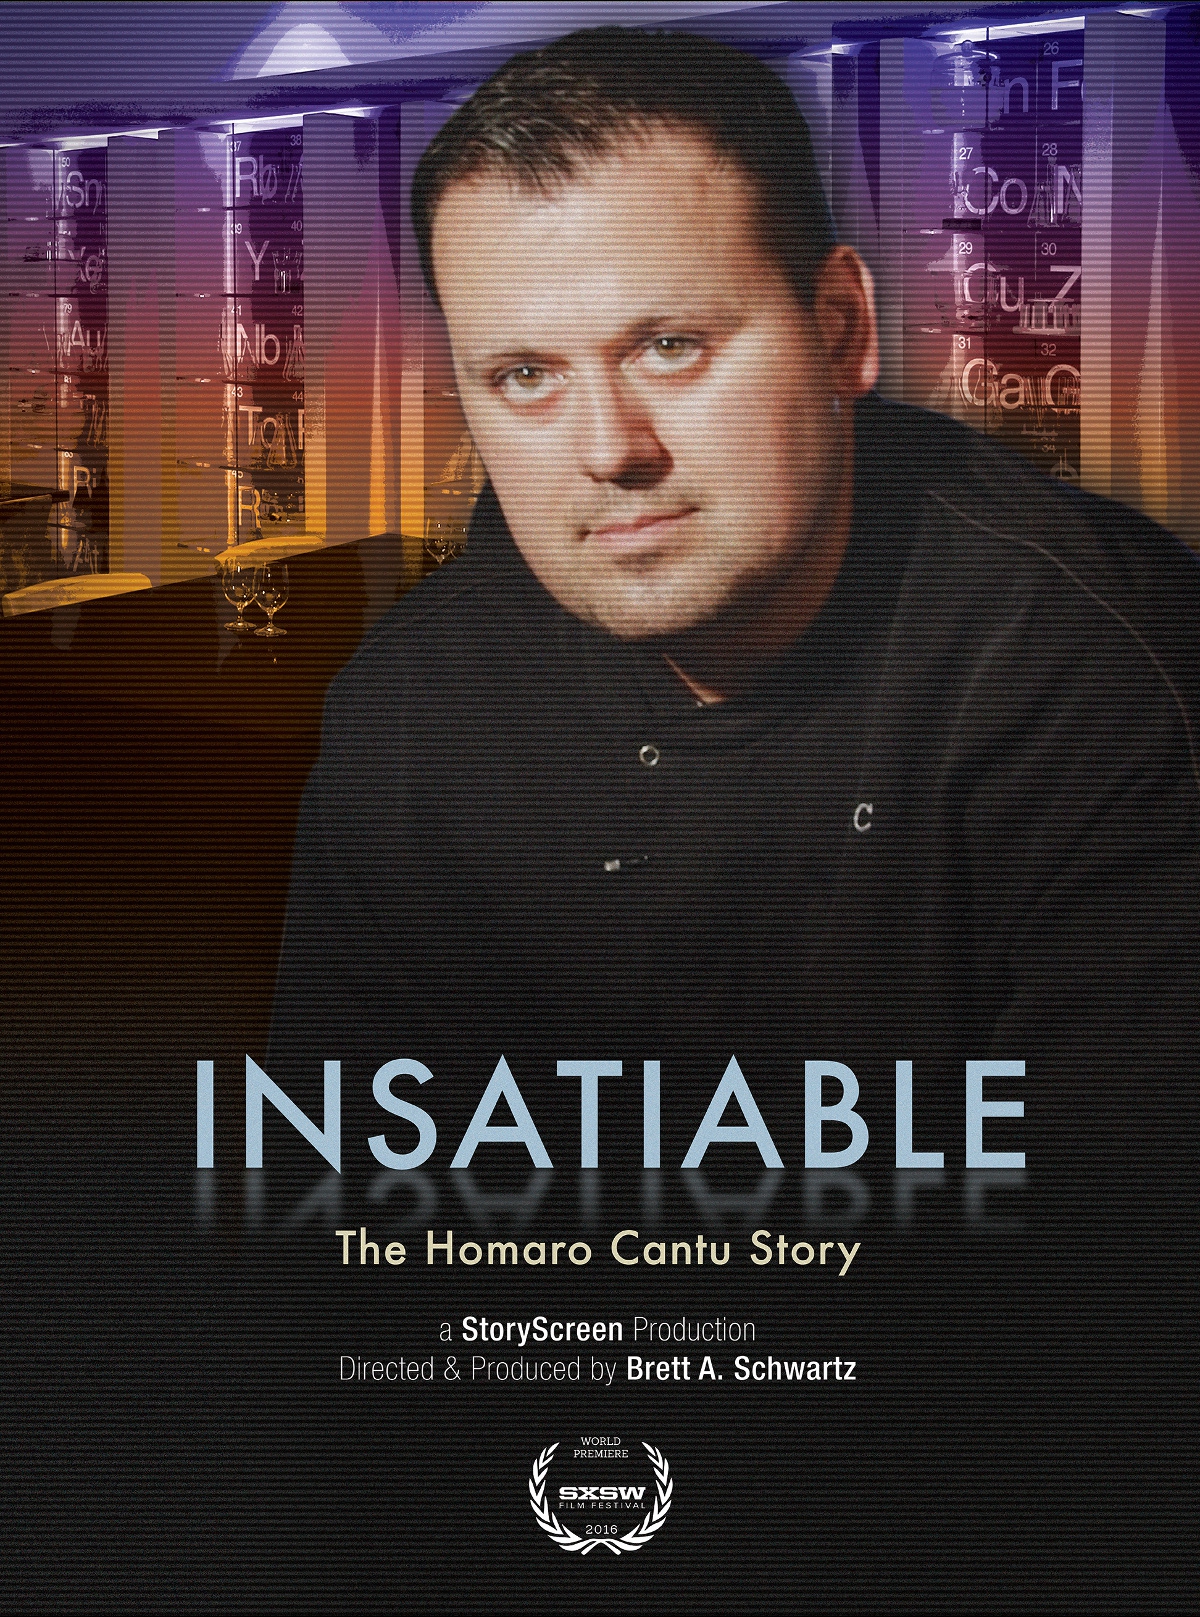  Insatiable - The Homaro Cantu Story (2015) Poster 